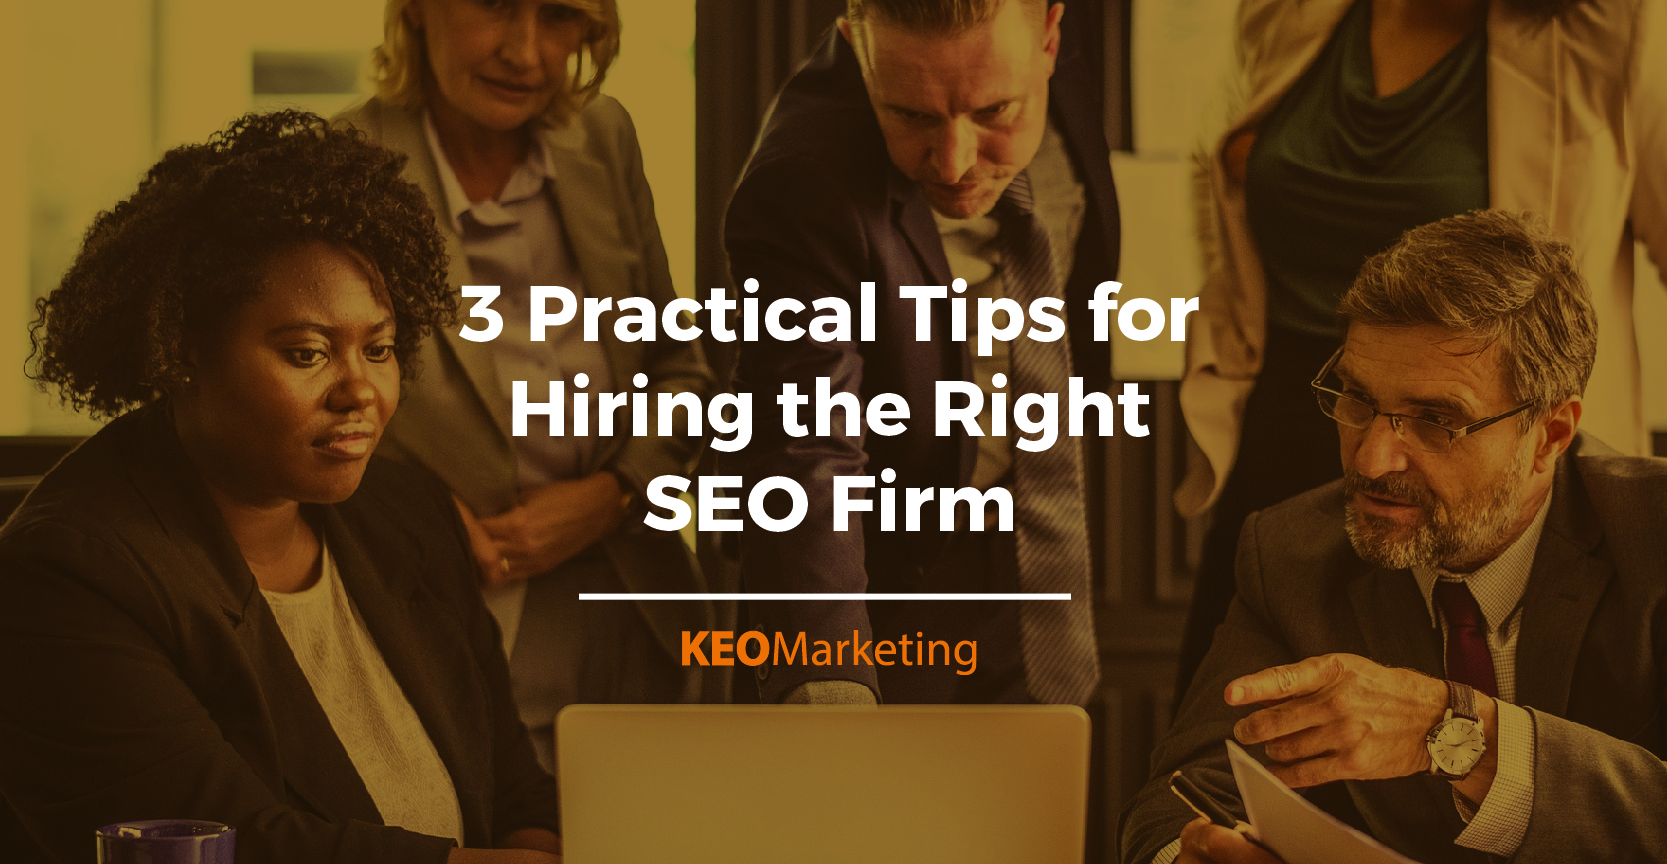 3 Practical Tips for Hiring the Right SEO Firm